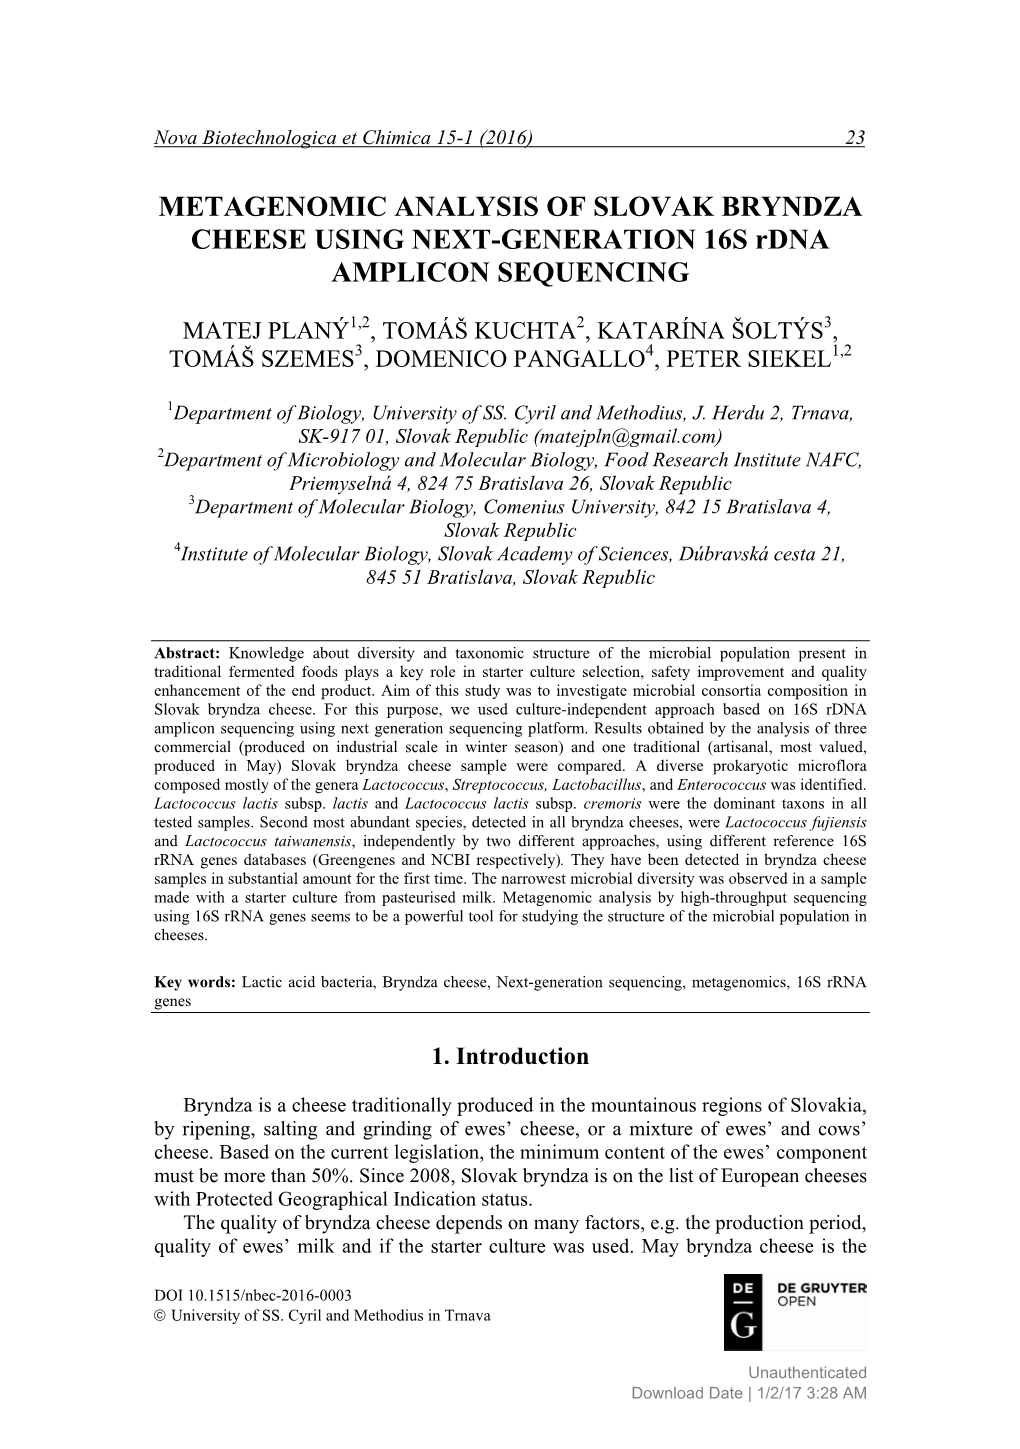 METAGENOMIC ANALYSIS of SLOVAK BRYNDZA CHEESE USING NEXT-GENERATION 16S Rdna AMPLICON SEQUENCING